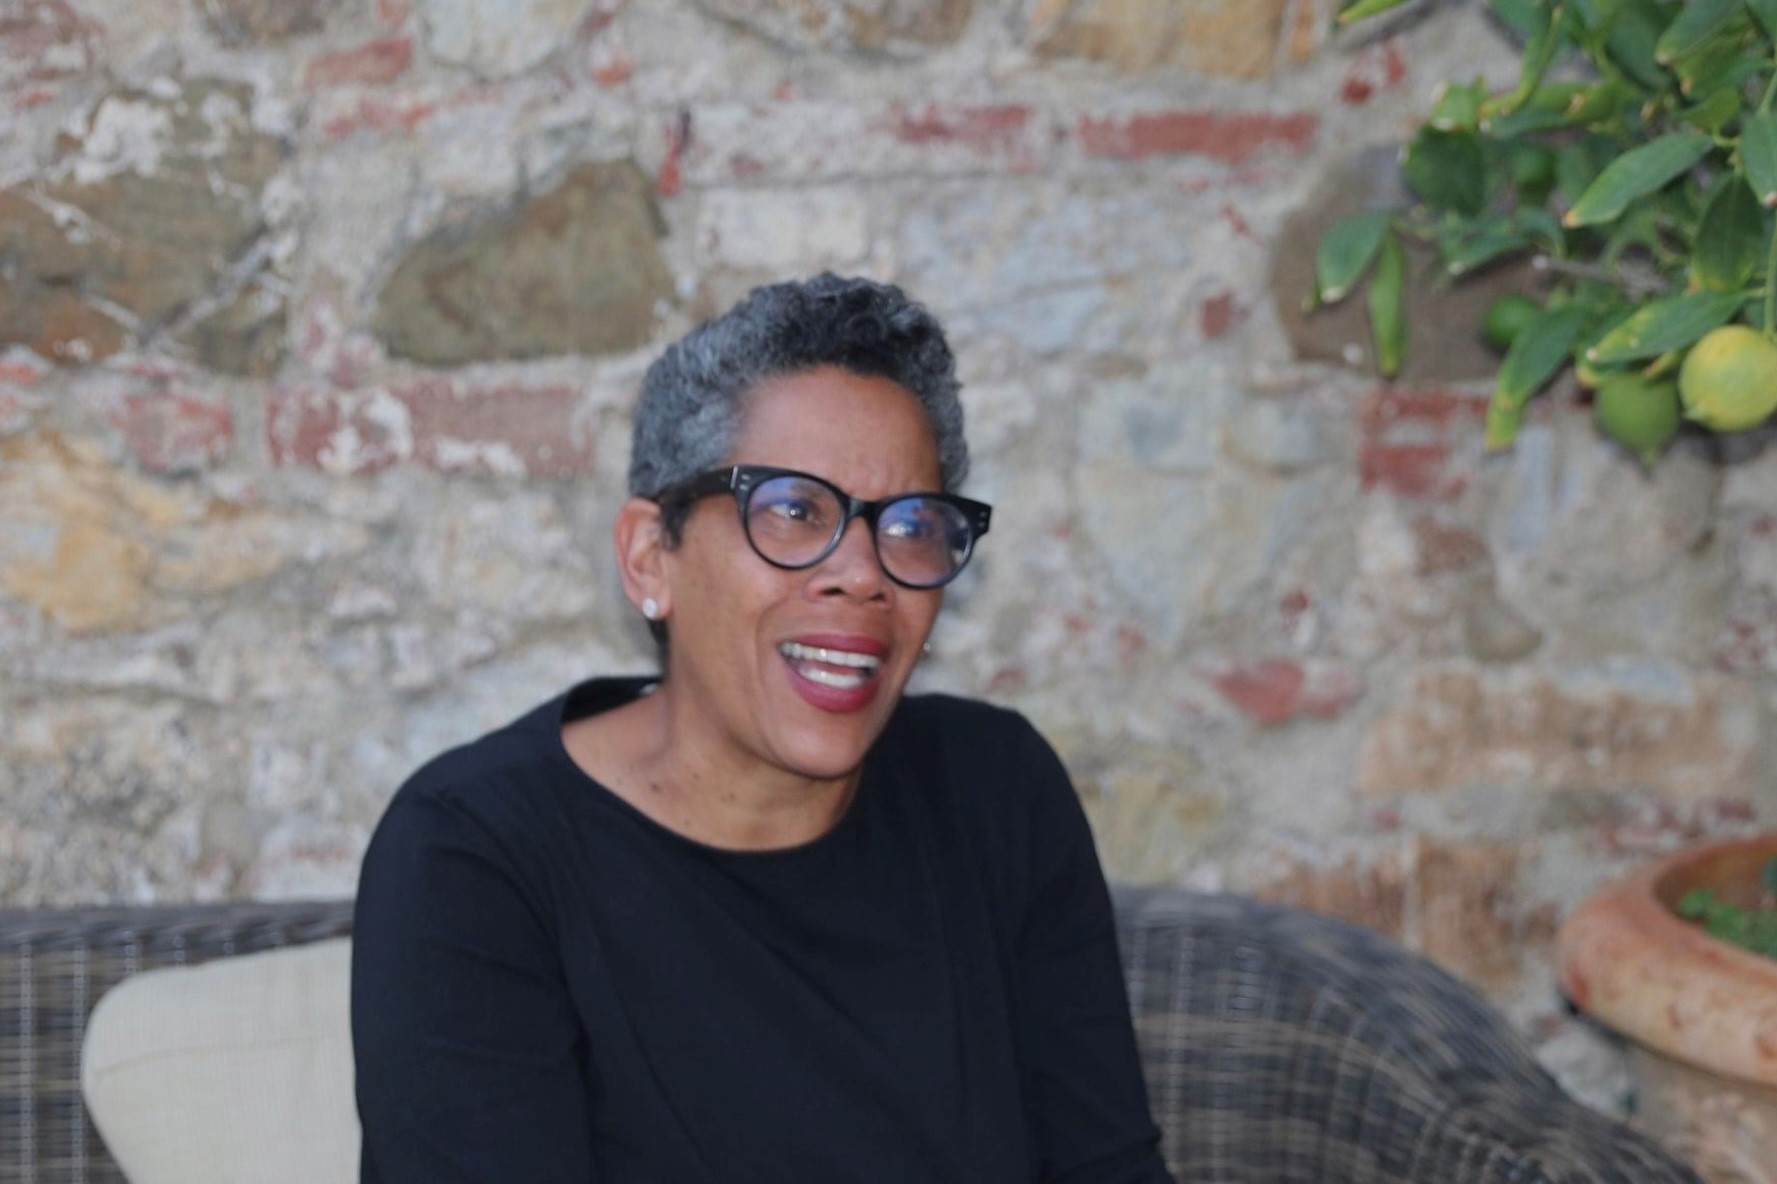 Black woman with greying dark hair wearing a long sleeved black top and thick black framed glasses in front of a stone wall